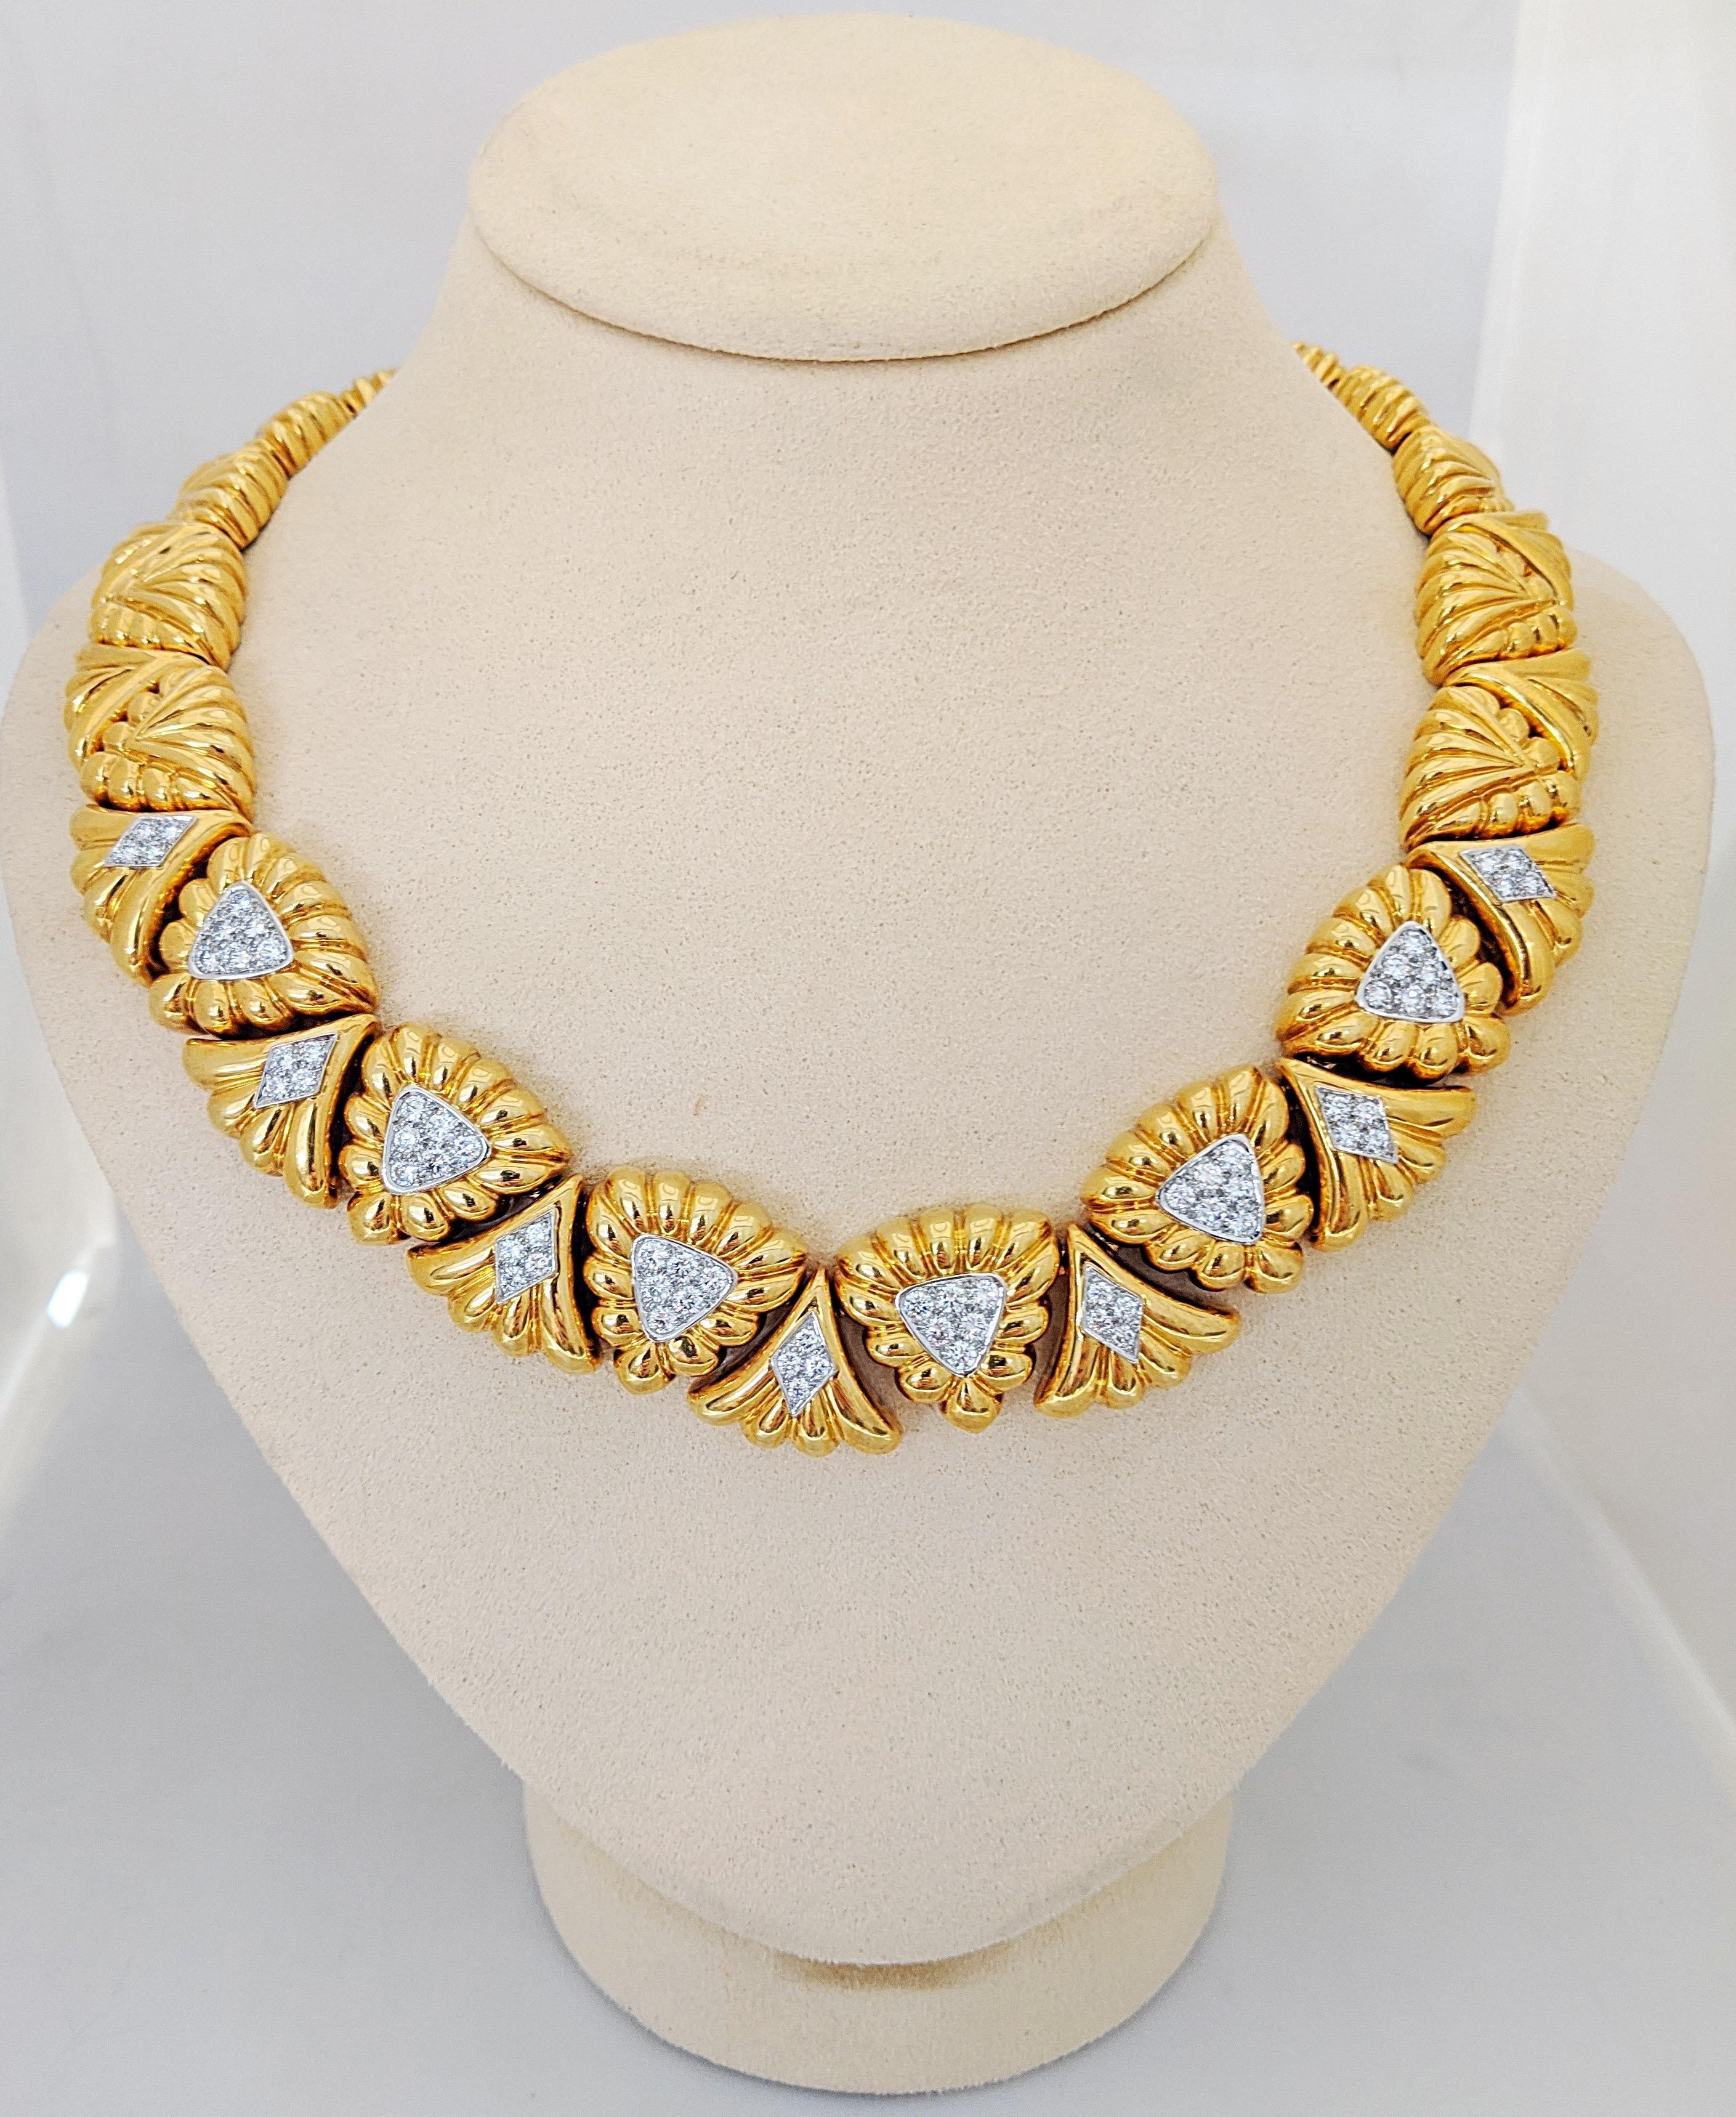 Chaavae Platinum and 18 Karat Yellow Gold and 2.92 Carat Diamond Collar Necklace For Sale 2